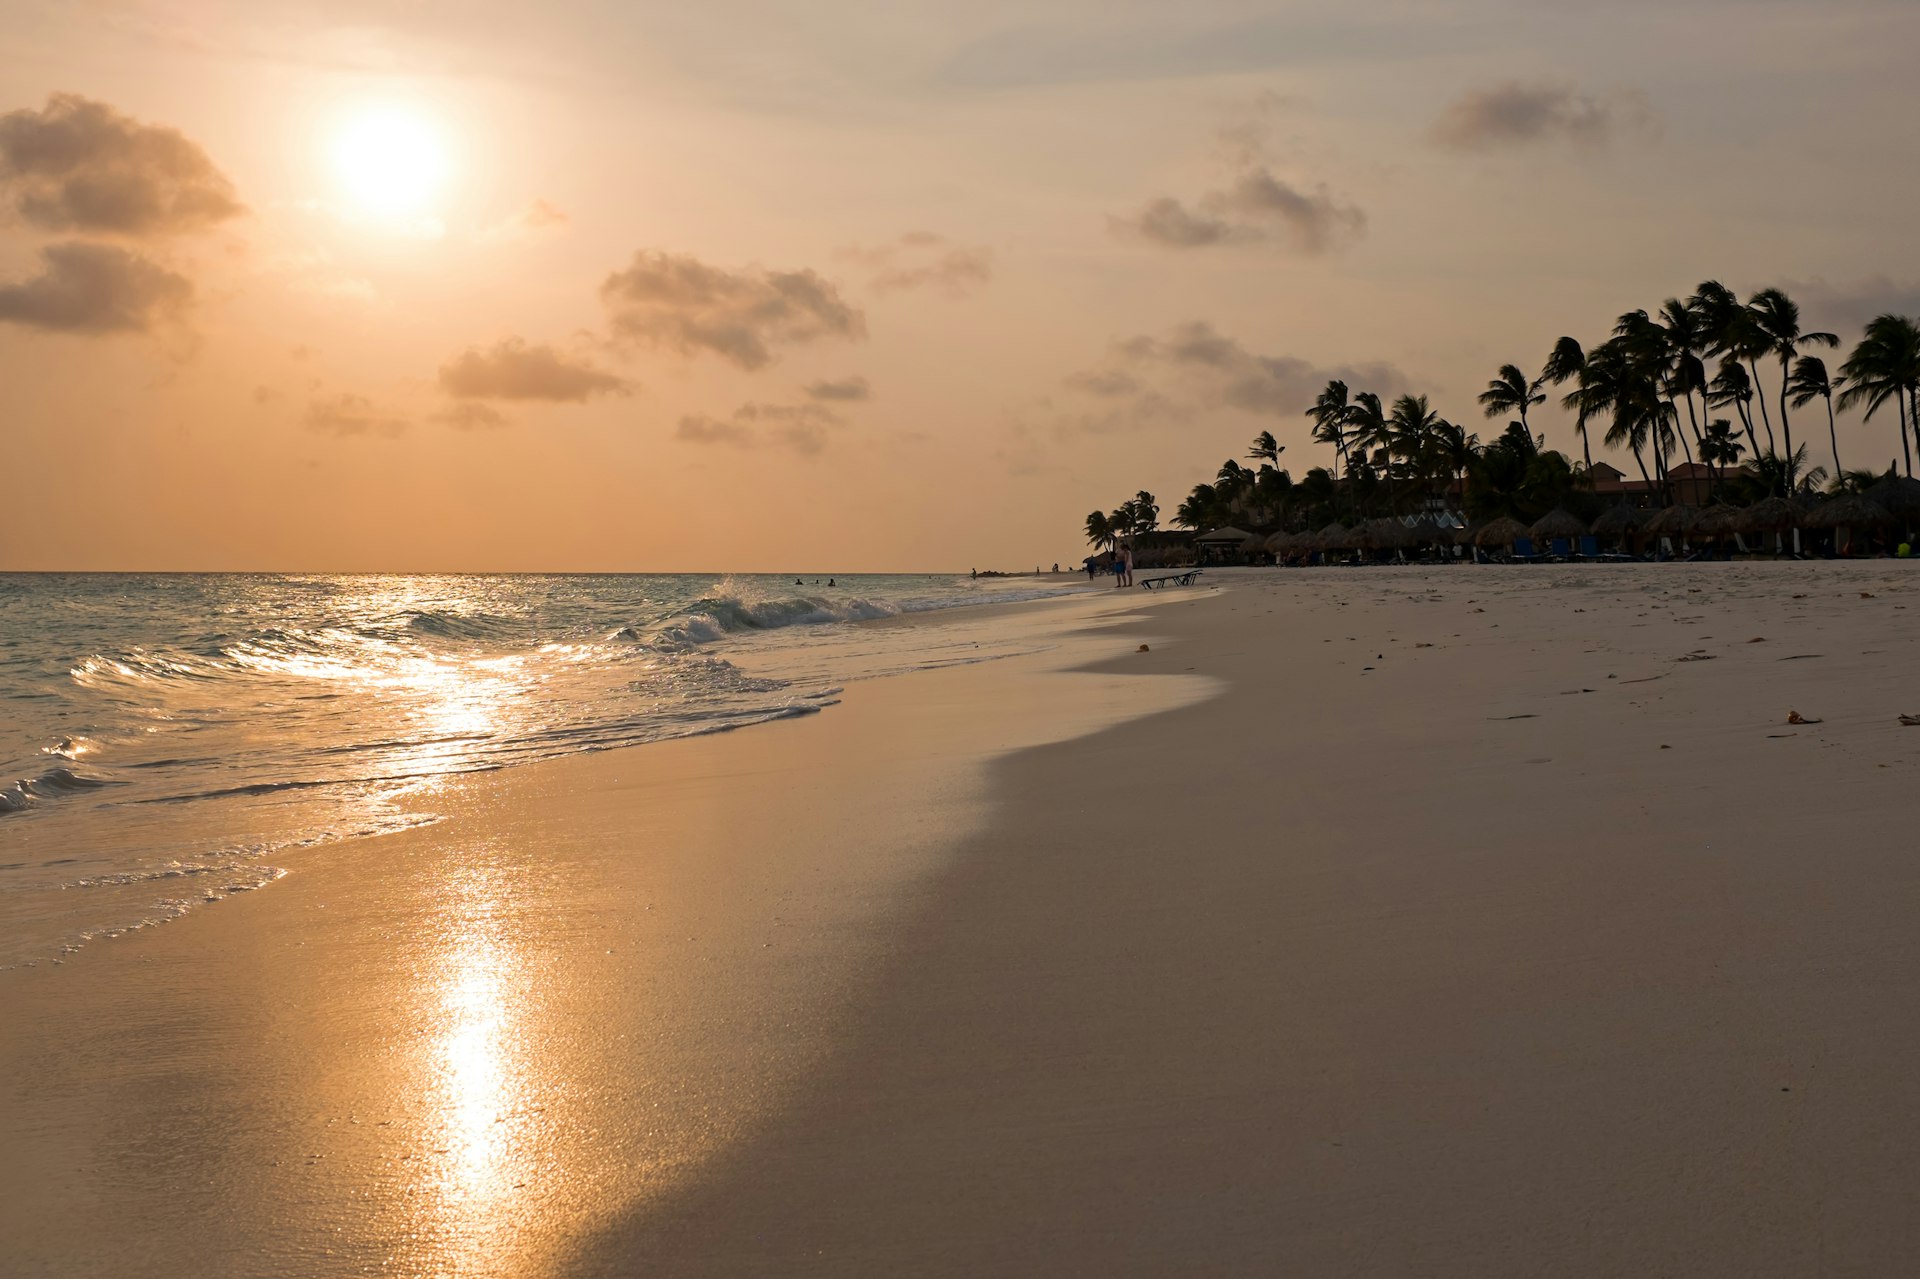 The sun sets on a sparely populated beach in Aruba. There are tall palm trees swaying in the wind in the background.